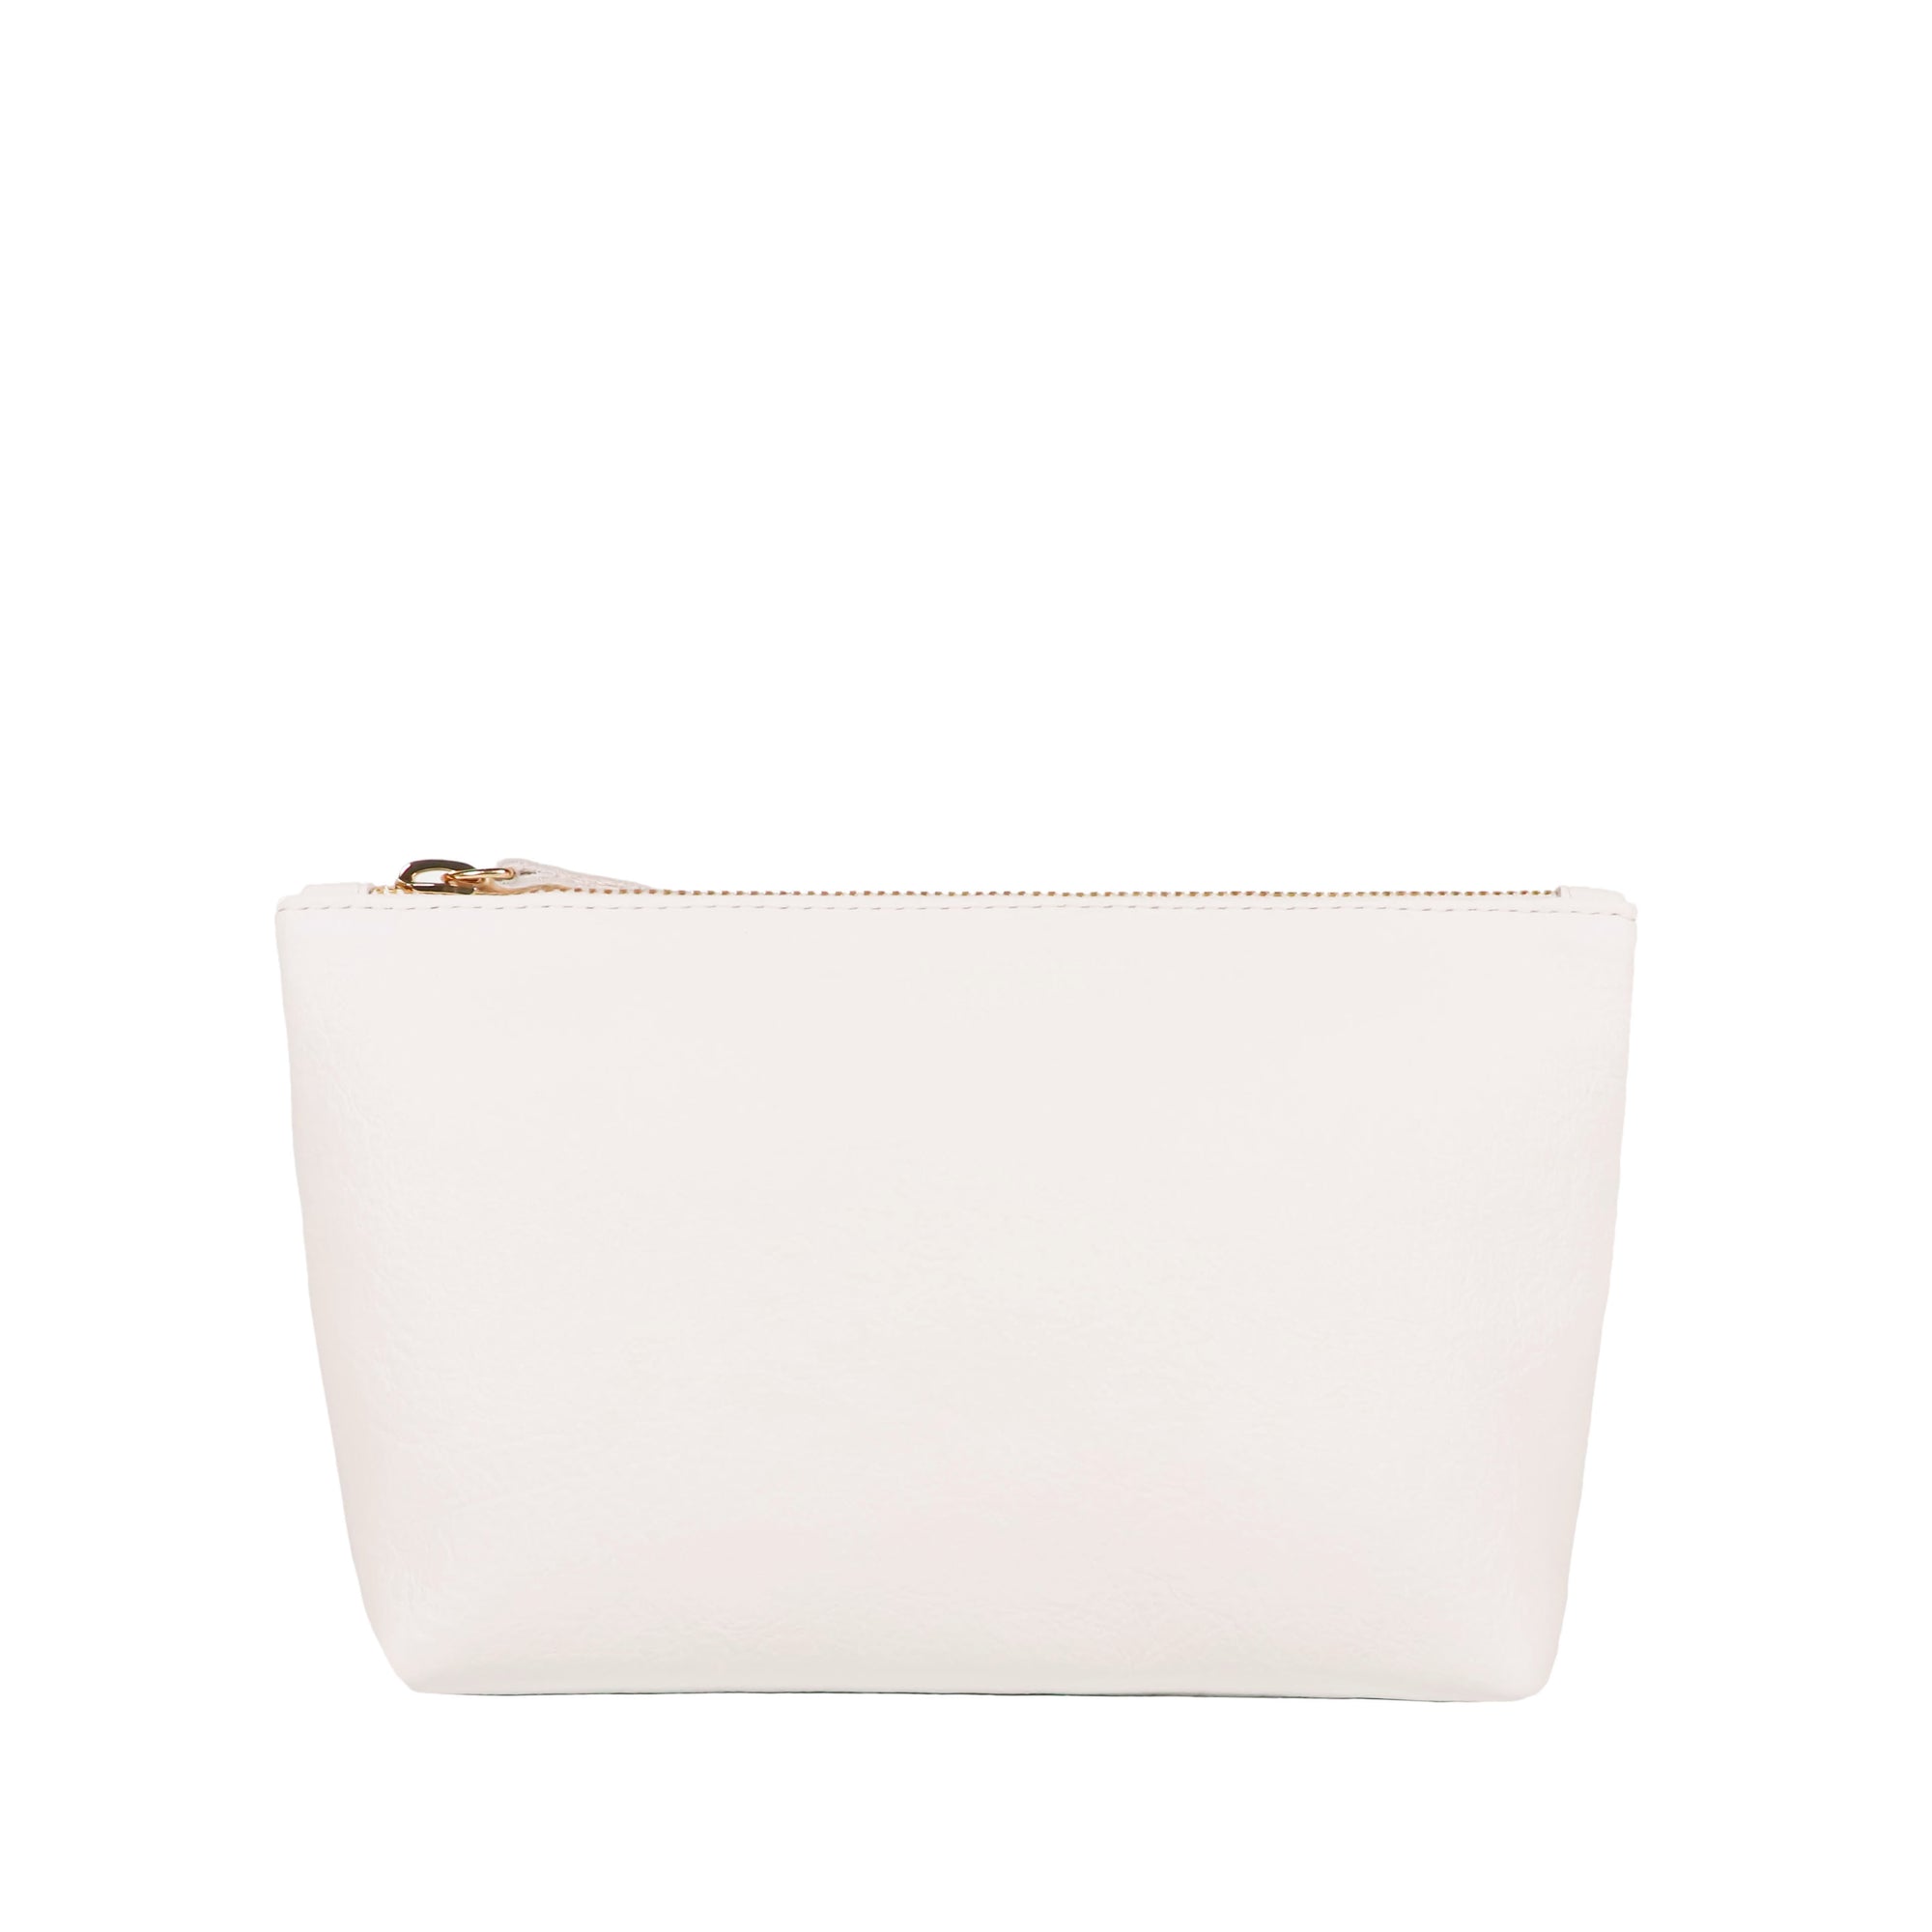 Napa Pouch - Leather zipper bag in Cream leather. Made in U.S.A. by Jana Kay.  Edit alt text